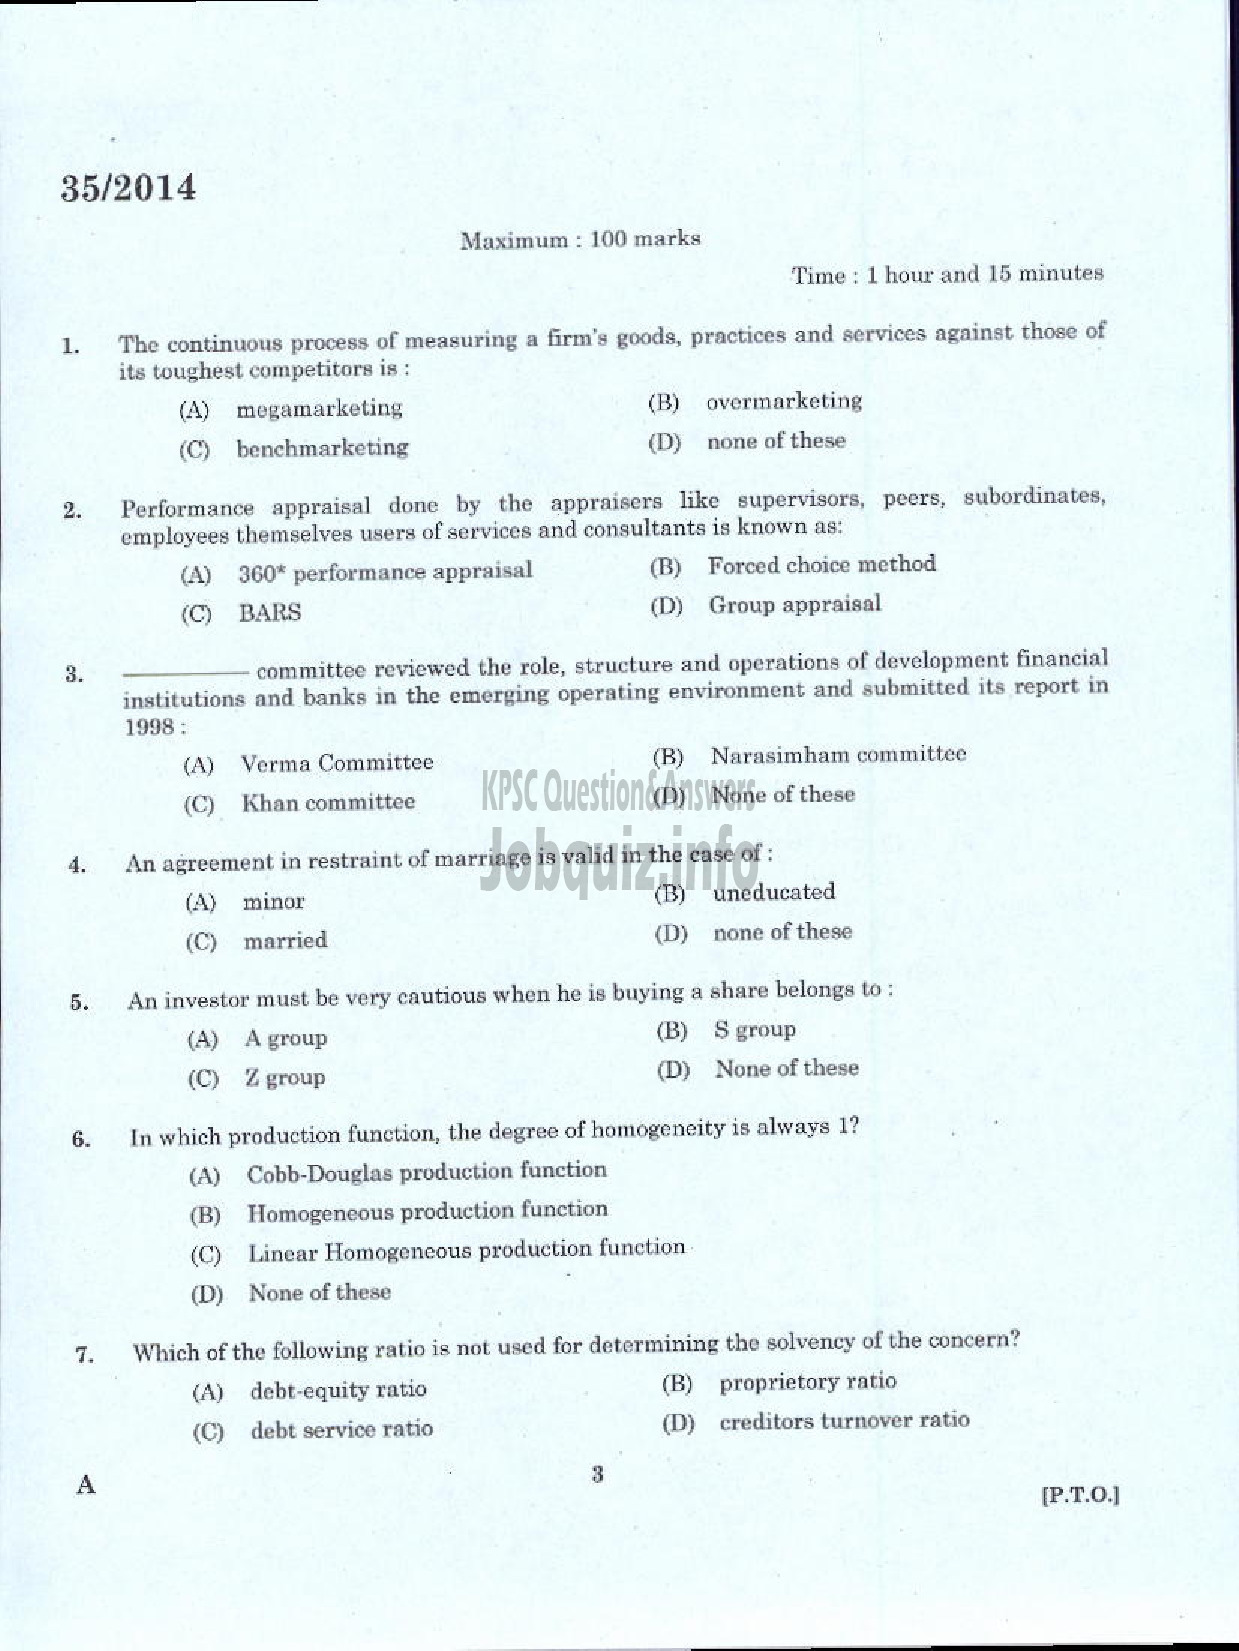 Kerala PSC Question Paper - JUNIOR ASSISTANT ACCOUNTS SR FOR ST ONLY TRAVANCORE COCHIN CHEMICALS LIMITED-1